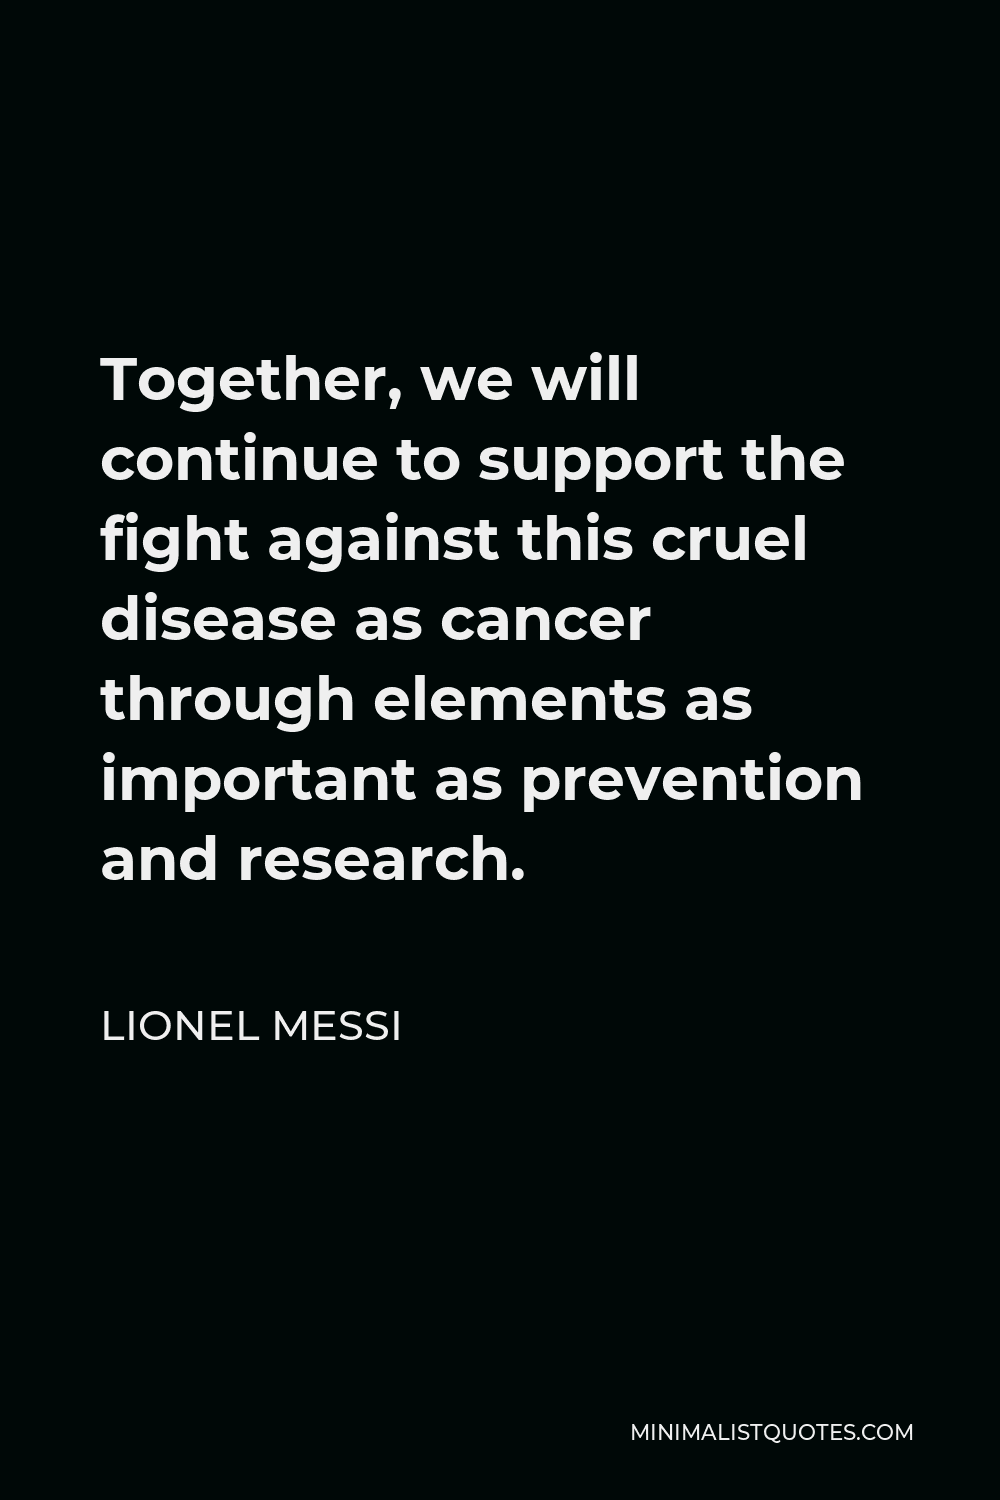 Lionel Messi Quote - Together, we will continue to support the fight against this cruel disease as cancer through elements as important as prevention and research.